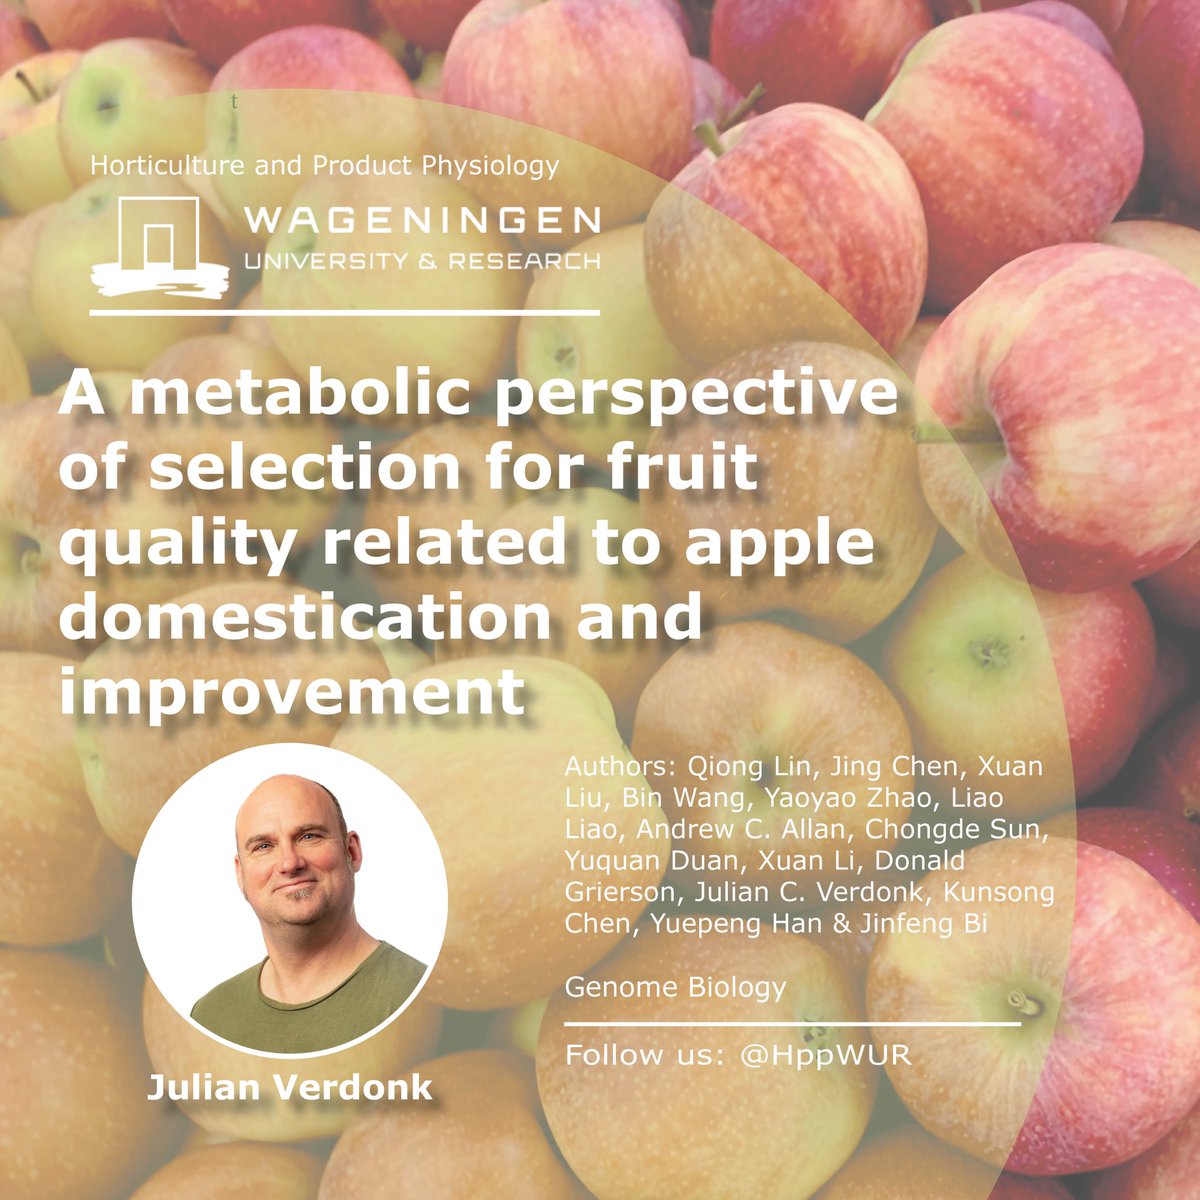 #publication |📑| A metabolic perspective of selection for fruit quality related to apple domestication and improvement - @JulianVerdonk 🔗 Link: genomebiology.biomedcentral.com/articles/10.11…